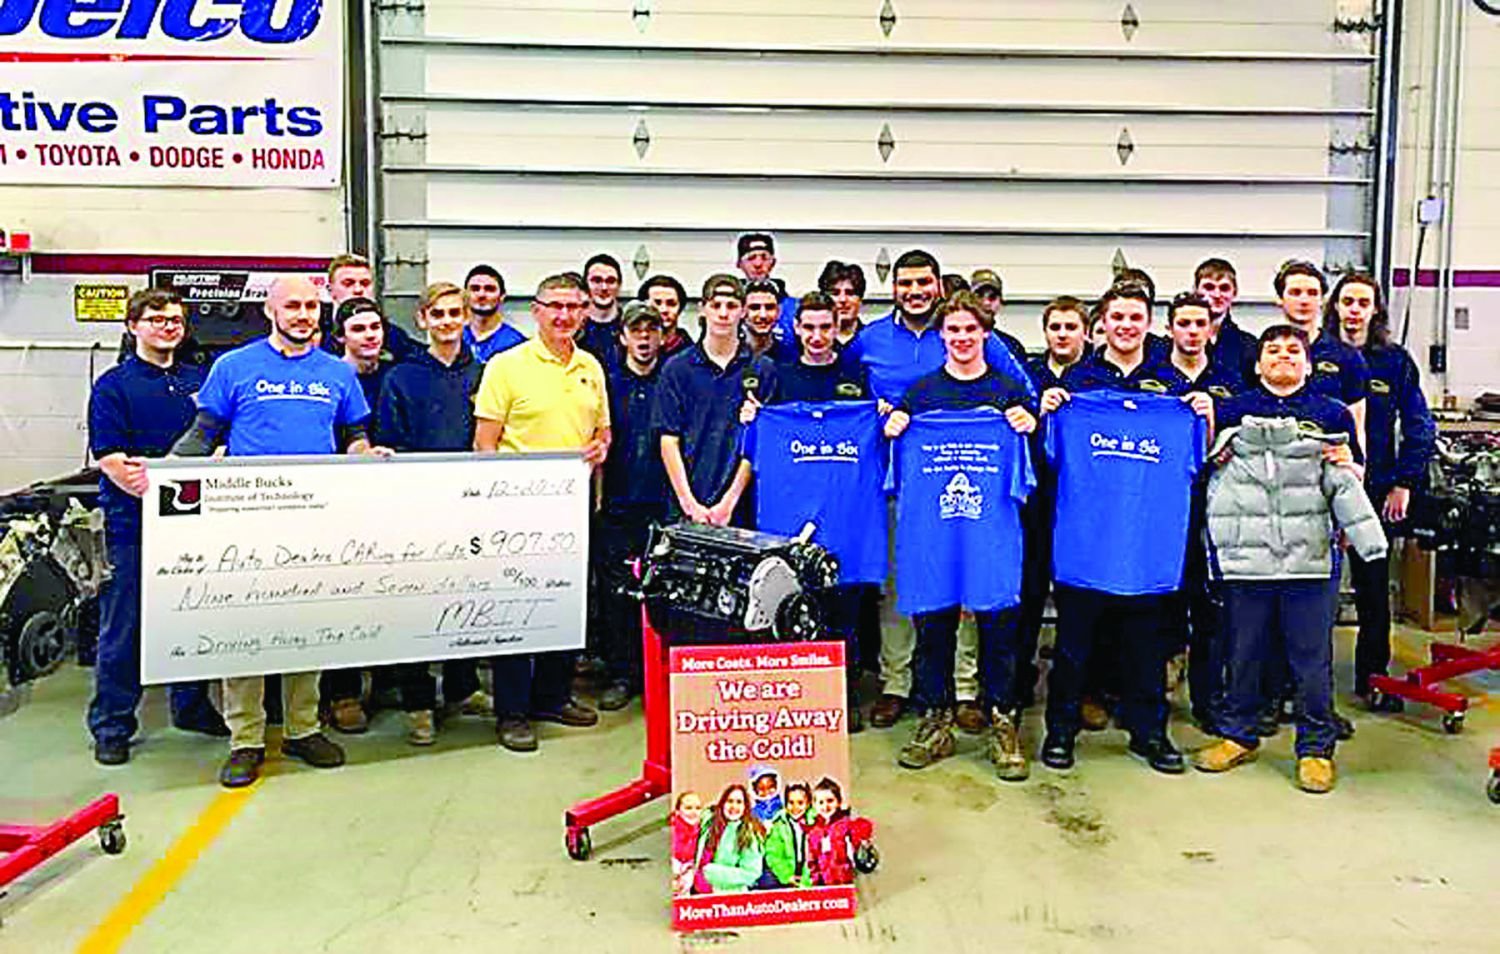 Middle Bucks Institute of Technology students enrolled in the Automotive Technology and Collision Repair Technology programs recently raised more than $900 for the Auto Dealers CARing for Kids Foundation’s Driving Away the Cold program.